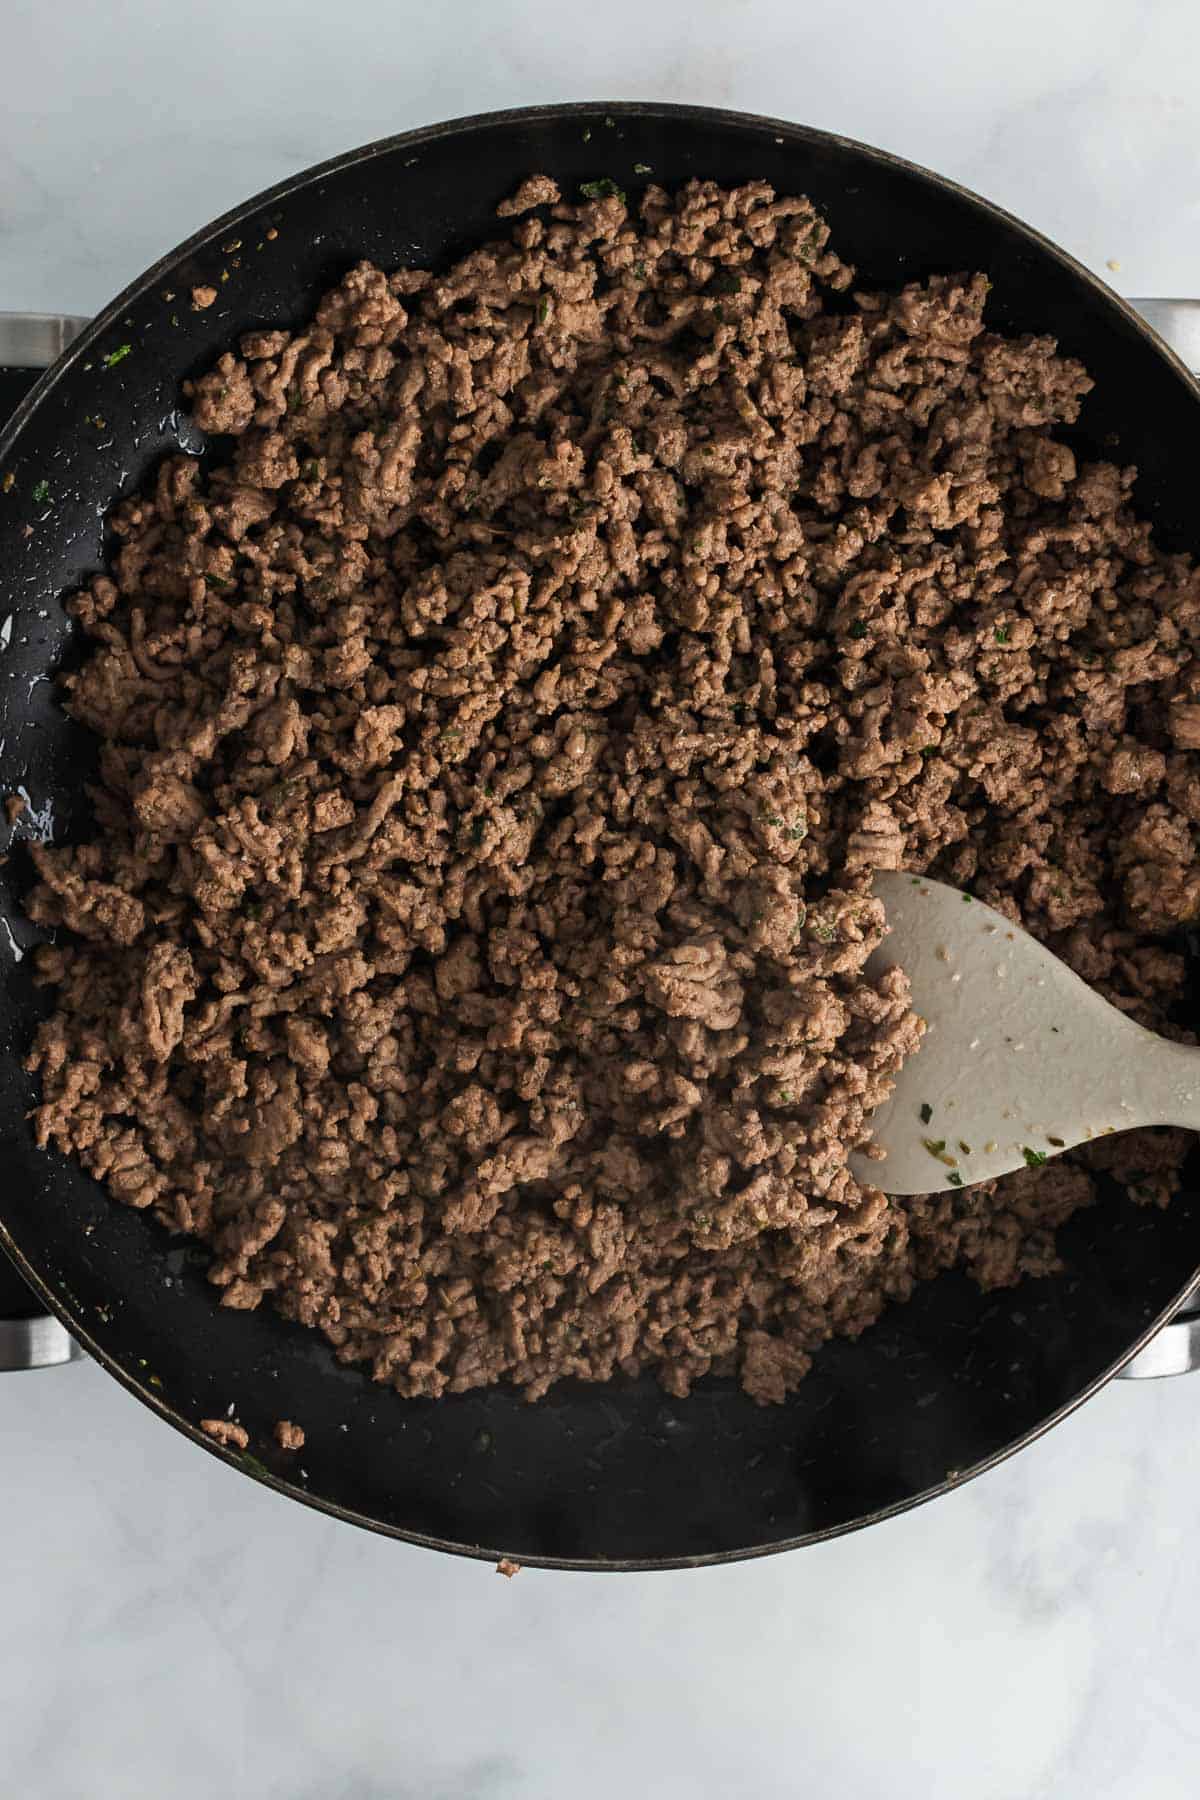 Cooked ground beef in a skillet, as seen from above